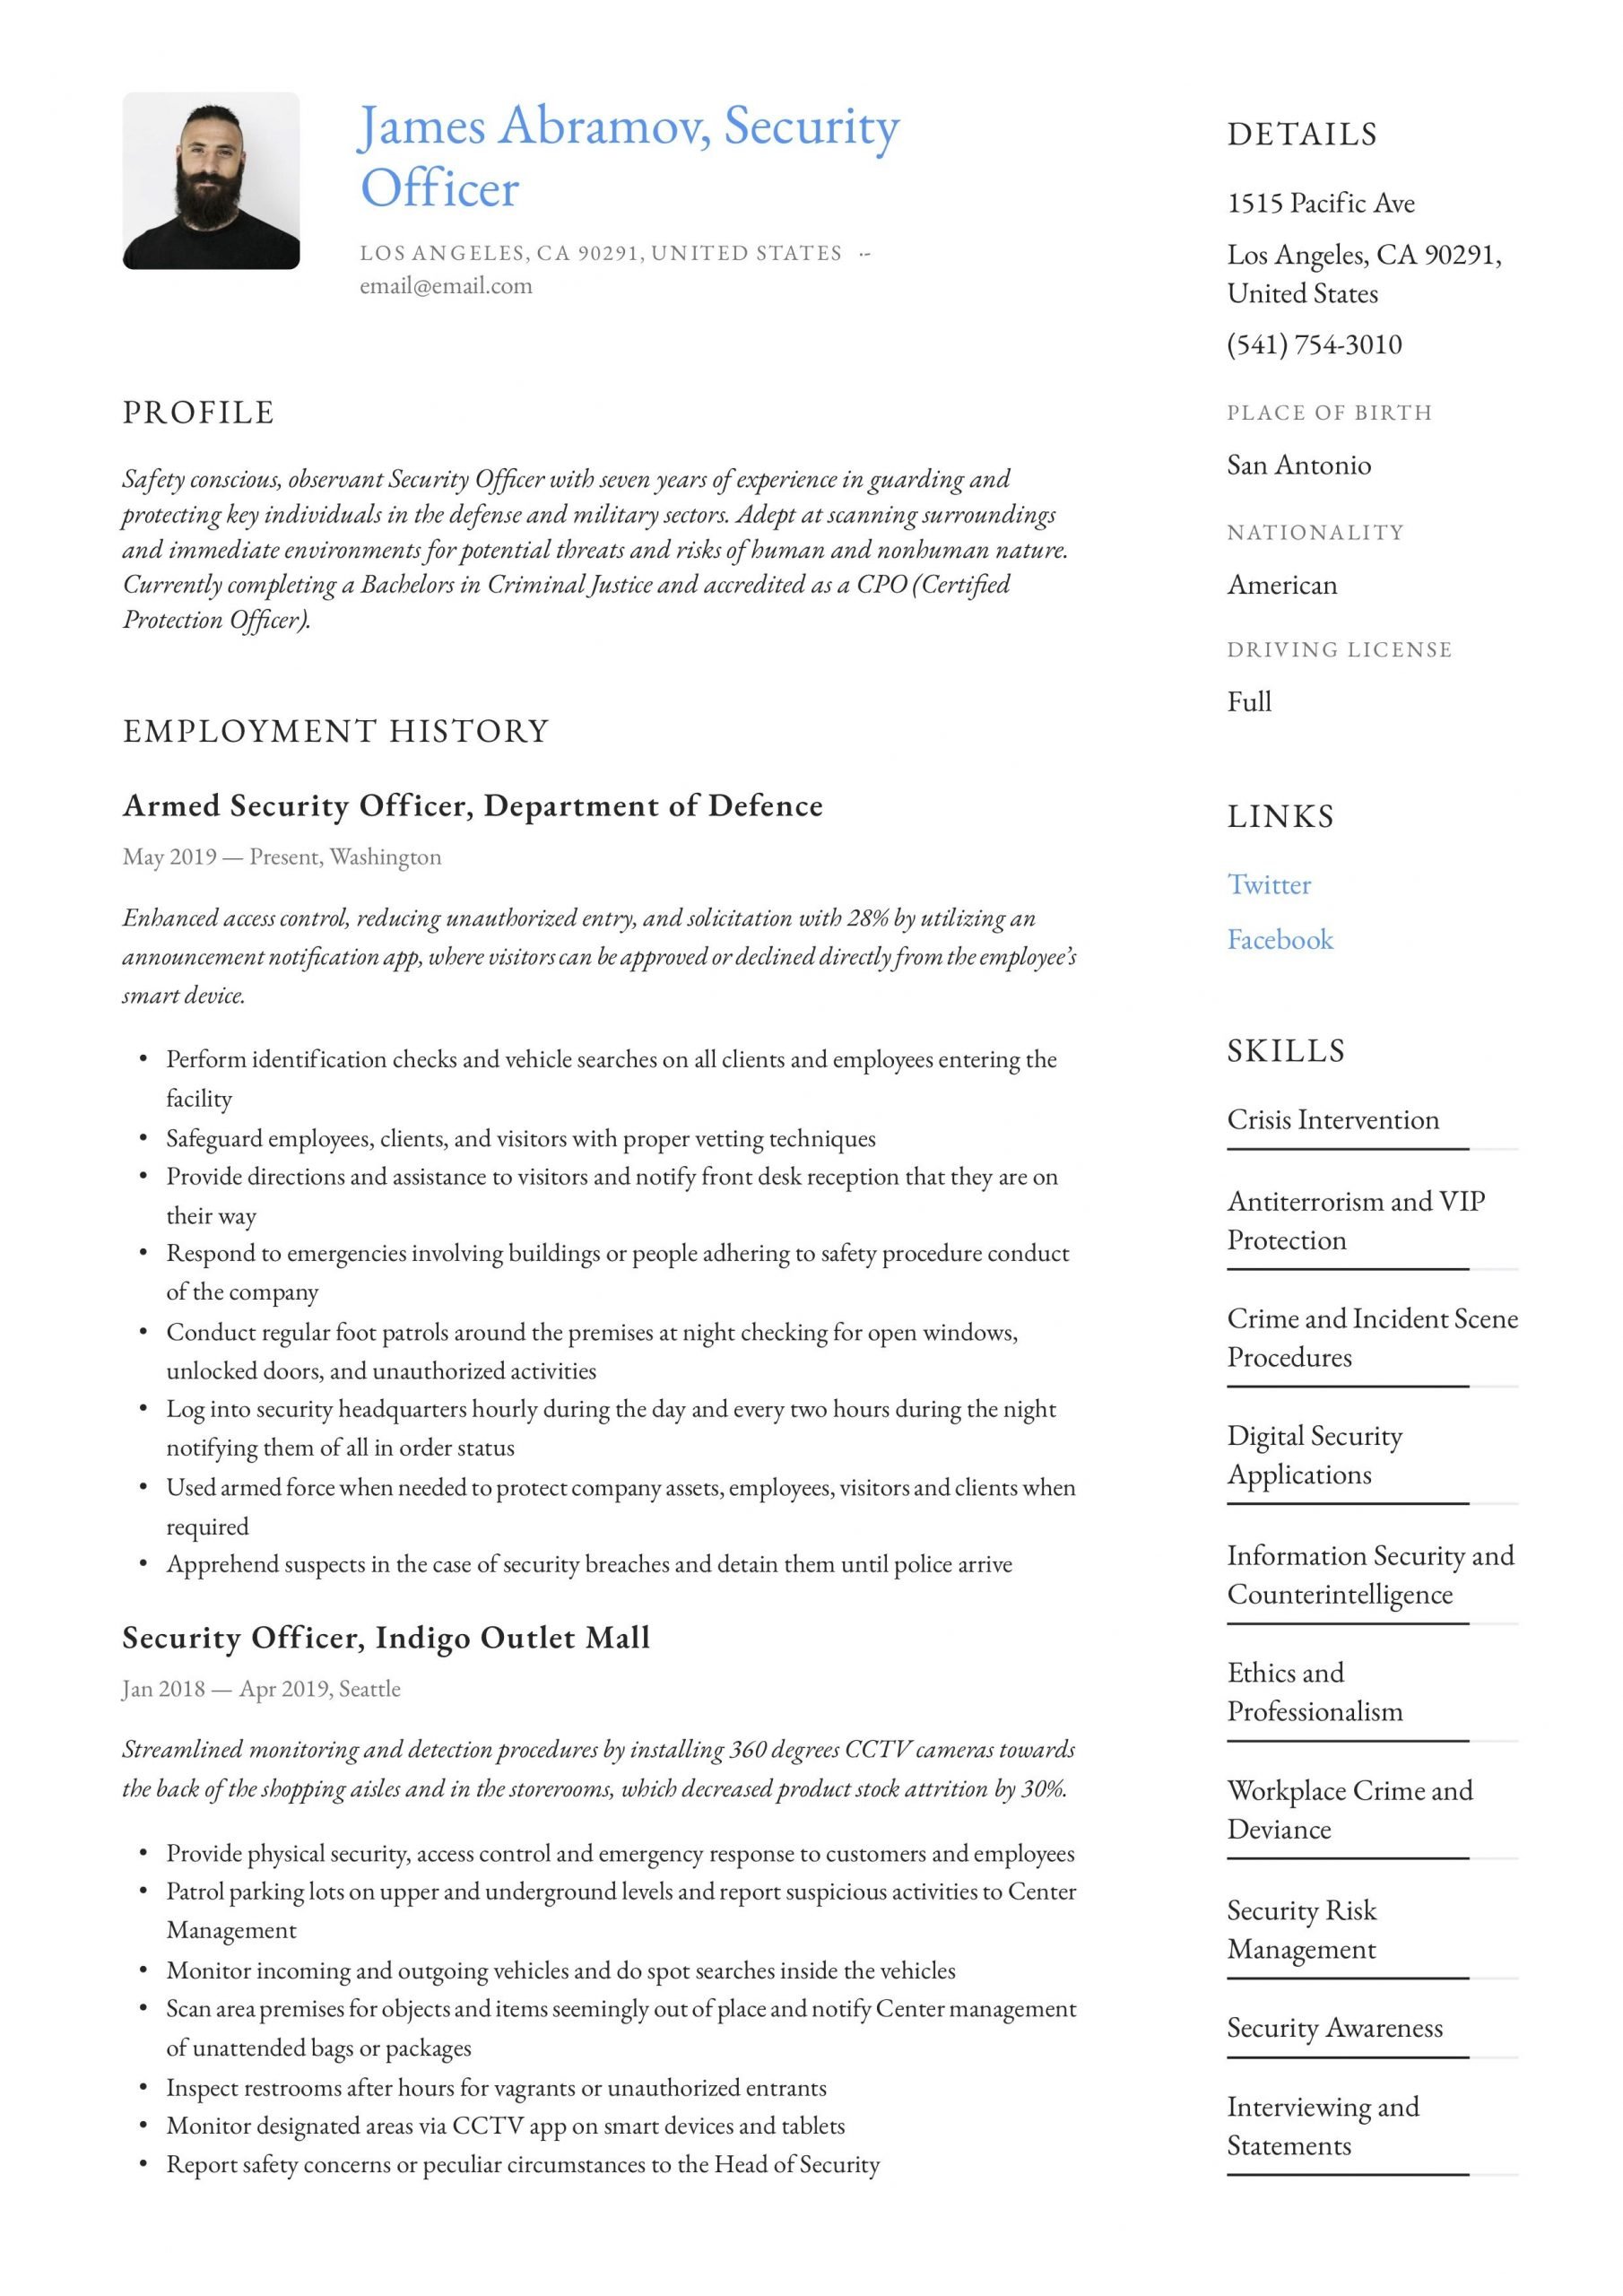 Security Officer Resume Example